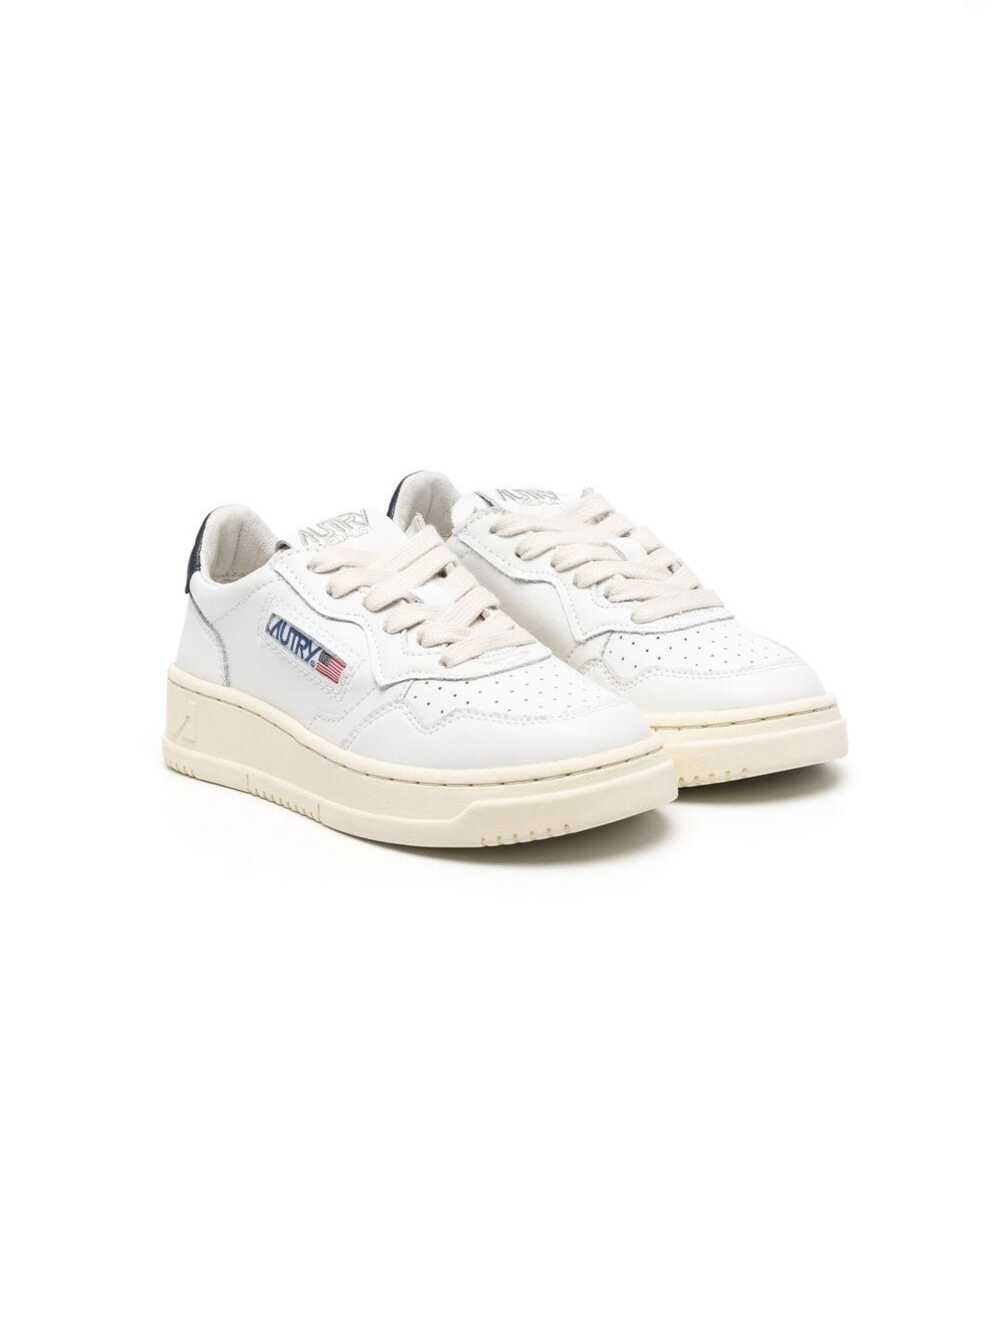 AUTRY WHITE MEDALIST LOW TOP SNEAKERS IN COW LEATHER